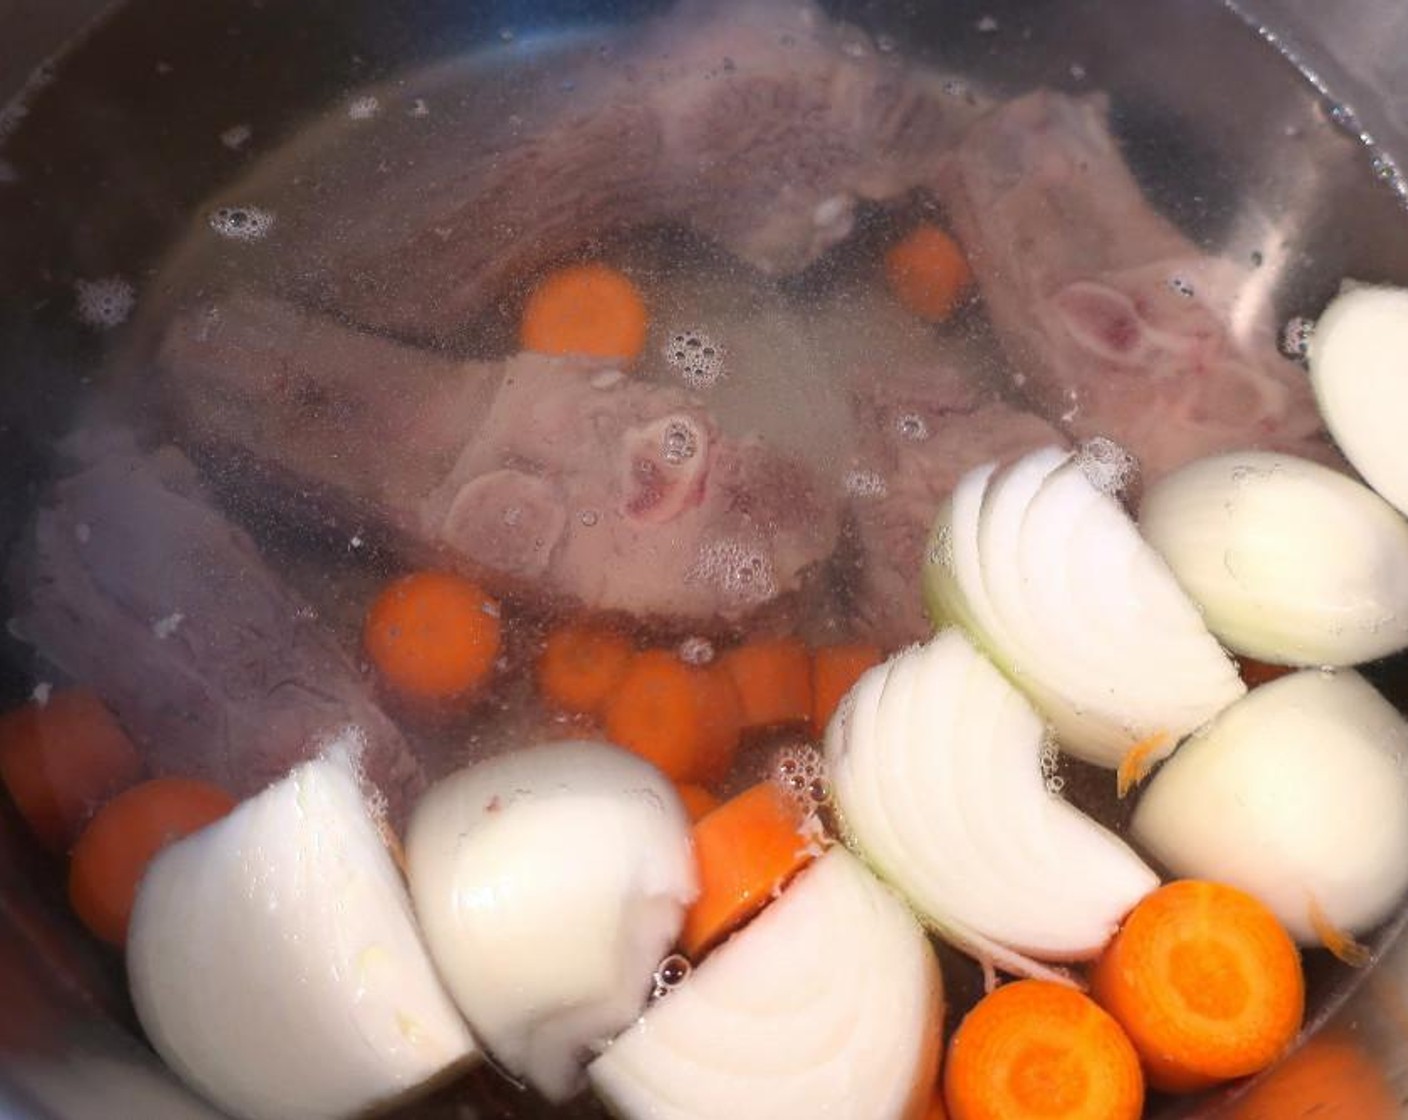 step 1 In a large pot, add the Beef Short Ribs (4 lb), Water (16 cups), Onion (1), Carrots (4), Kosher Salt (to taste), and Freshly Ground Black Pepper (to taste). Cook until ribs are soft but not falling apart.